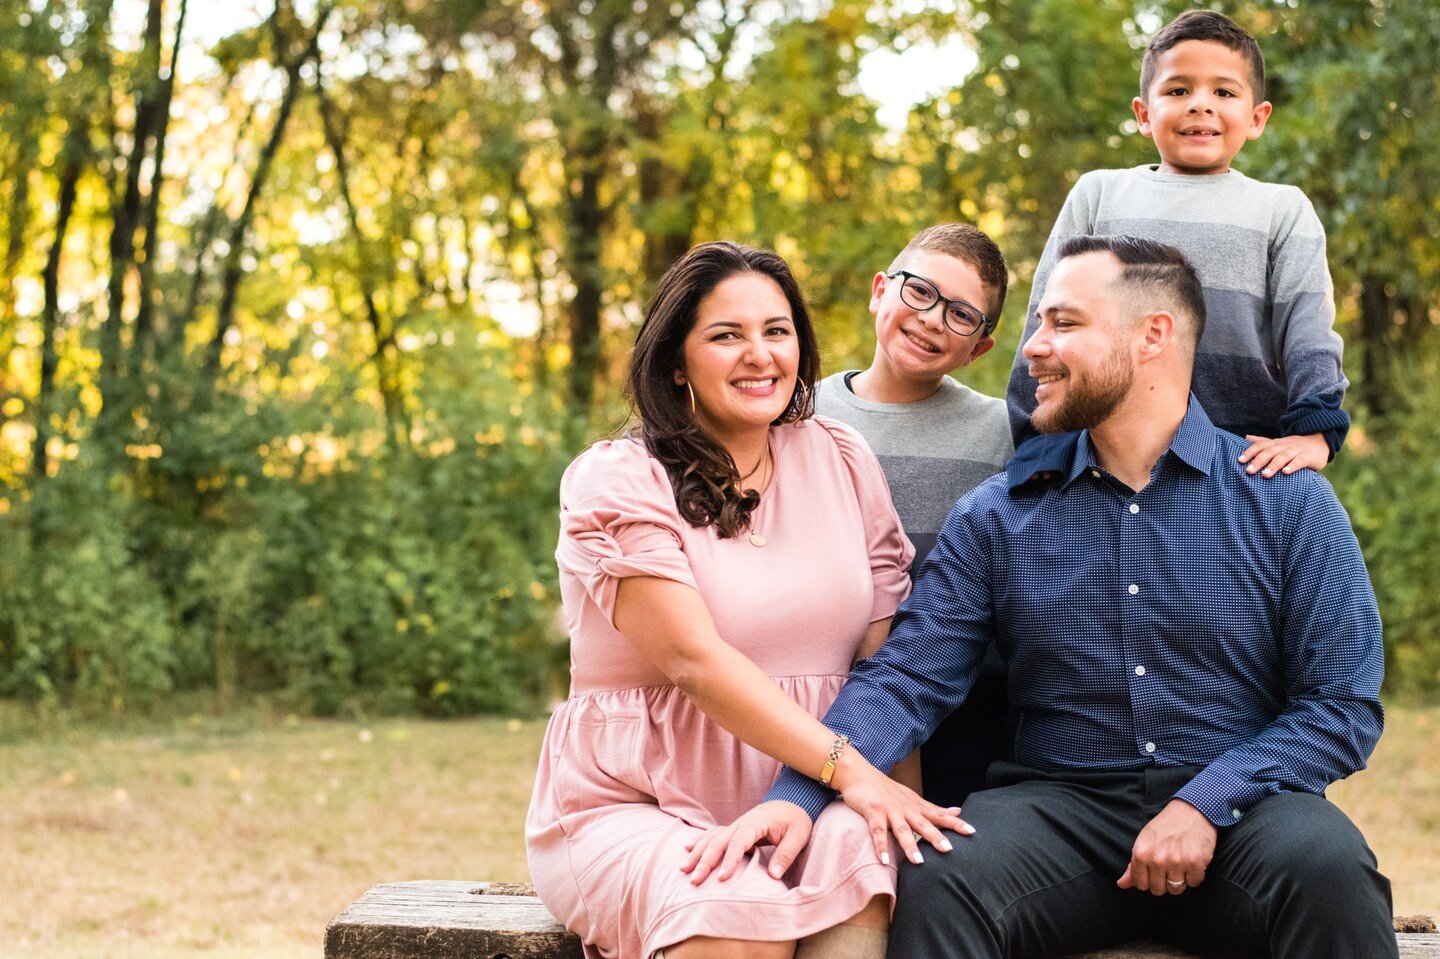 Family sessions are my fav time of year! Book yours now.